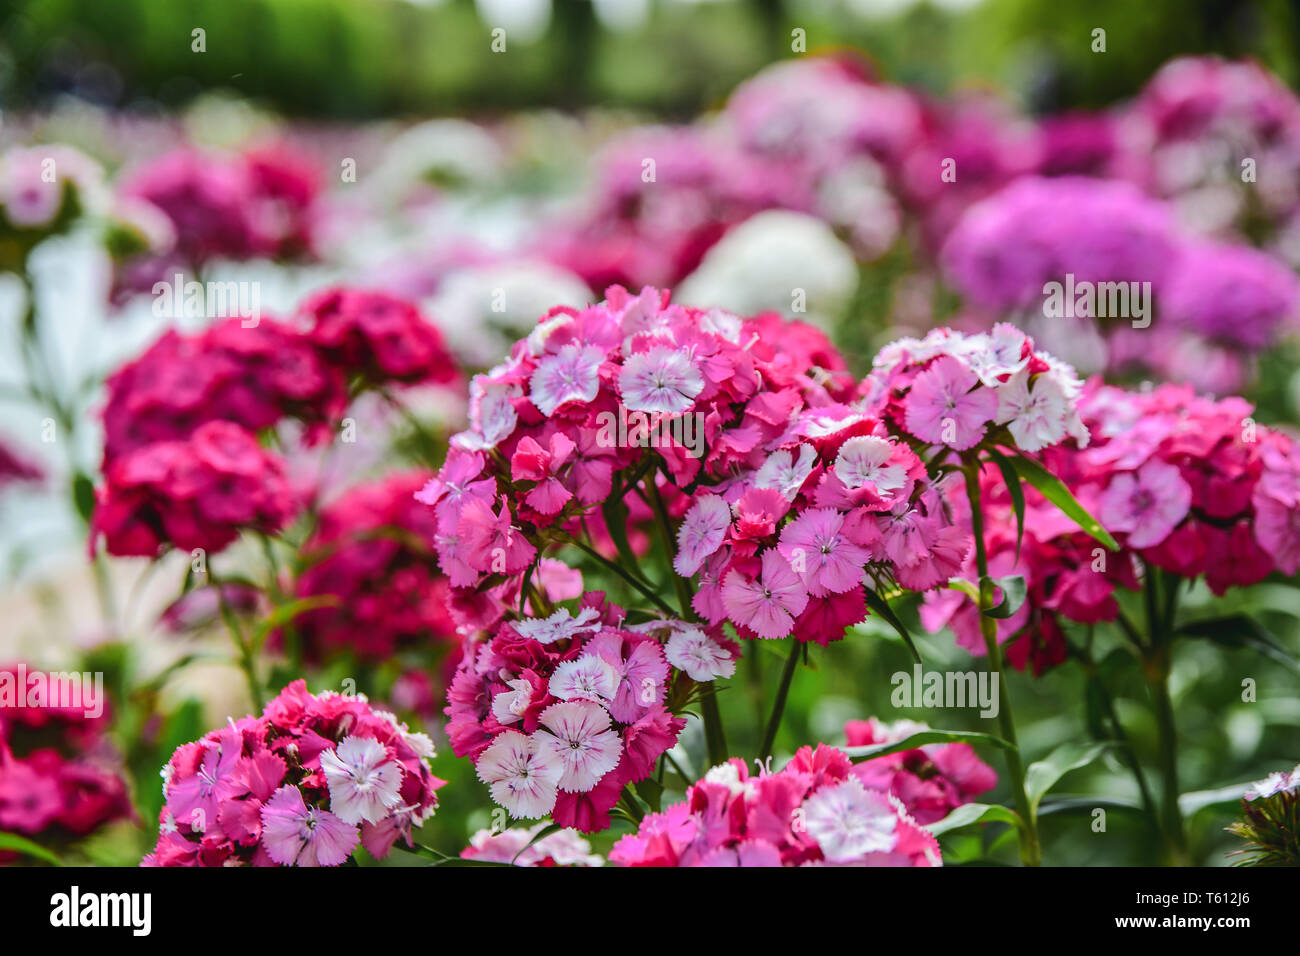 Close-up blooming carnation glory pink flower Dianthus barbatus. Pink and purple flowers. Species of Dianthus barbatus Stock Photo